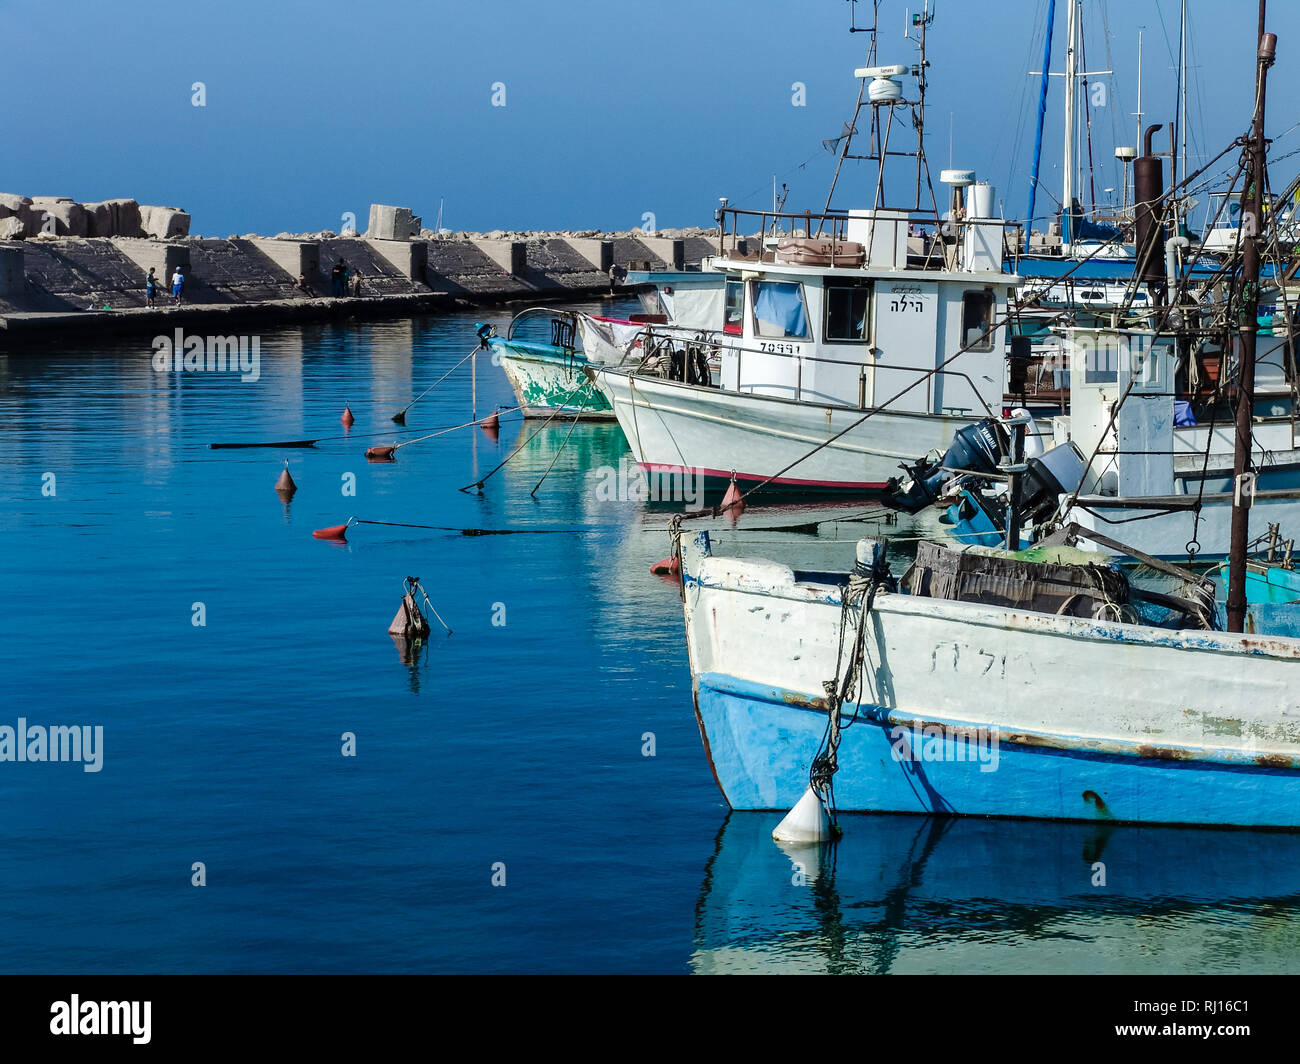 Number of small fishing sail boats, floating on smooth blue sea water at Jaffa port harbor in Israel, on a beautiful sunny summer day. Stock Photo